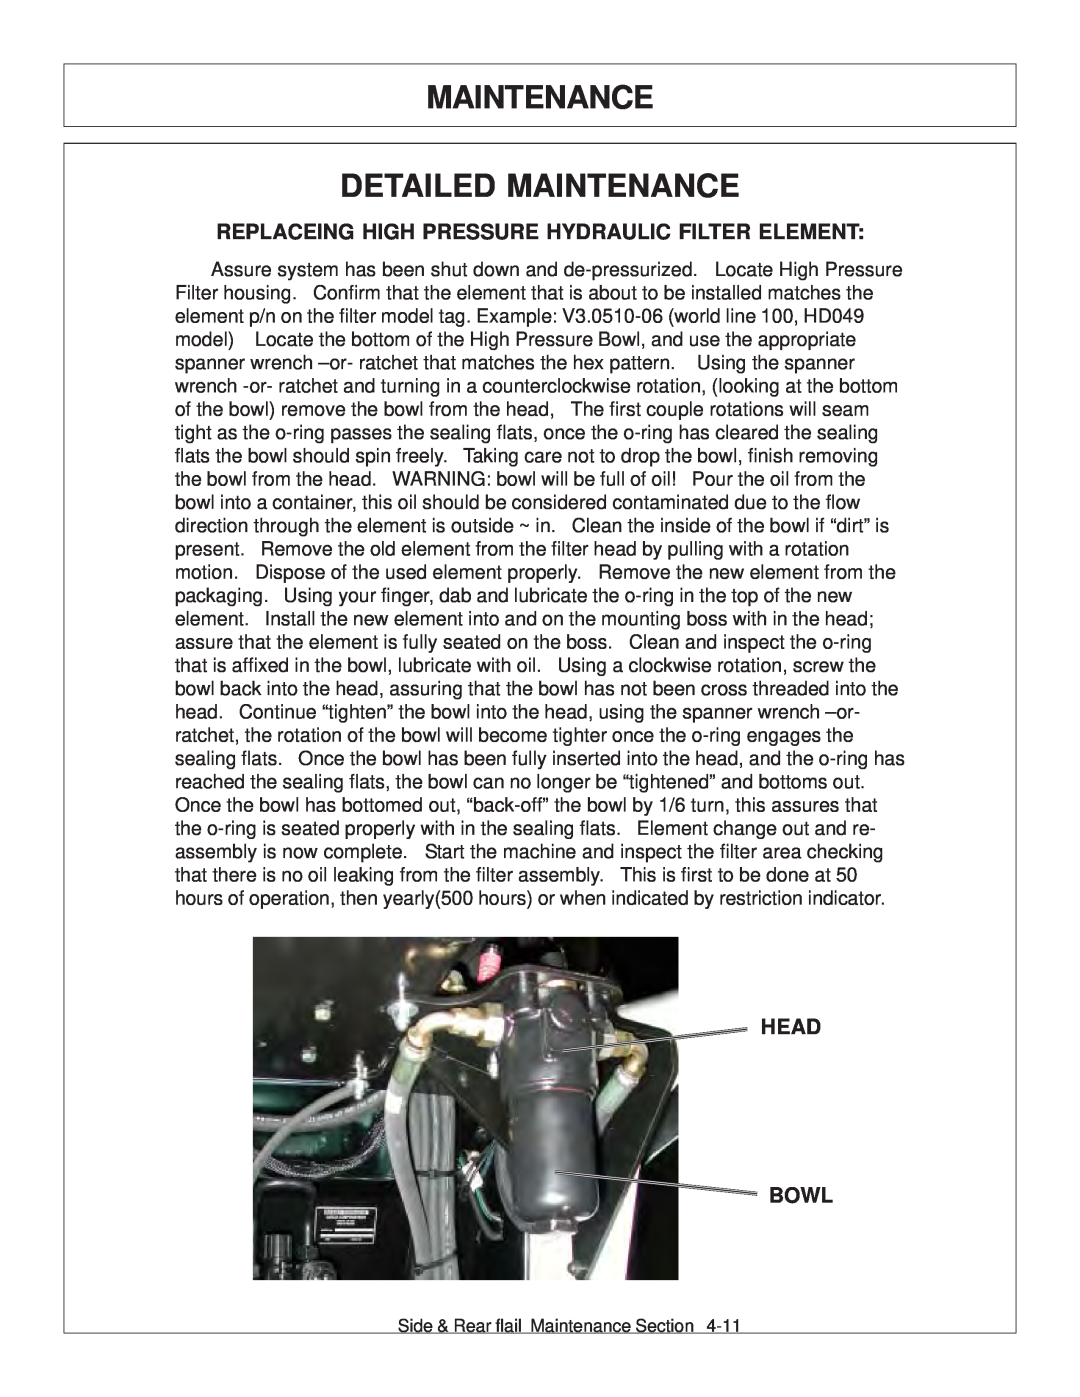 Tiger JD 5083E, JD 5101E Maintenance Detailed Maintenance, Replaceing High Pressure Hydraulic Filter Element, Head Bowl 